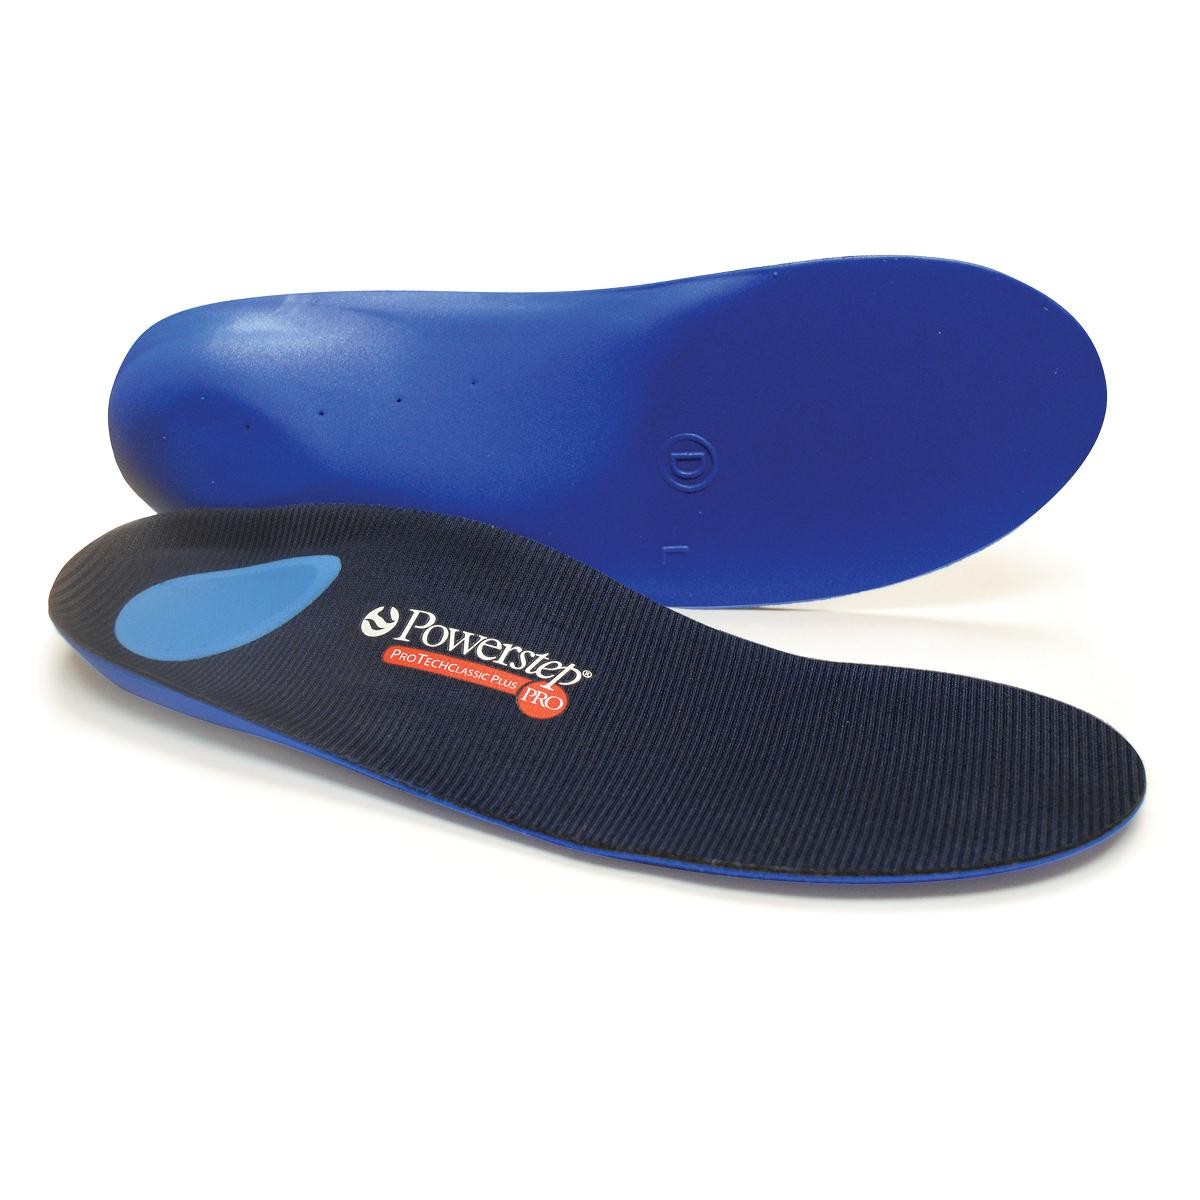 Pisces Healthcare Solutions. ProTech Classic Plus Full Length Orthotics